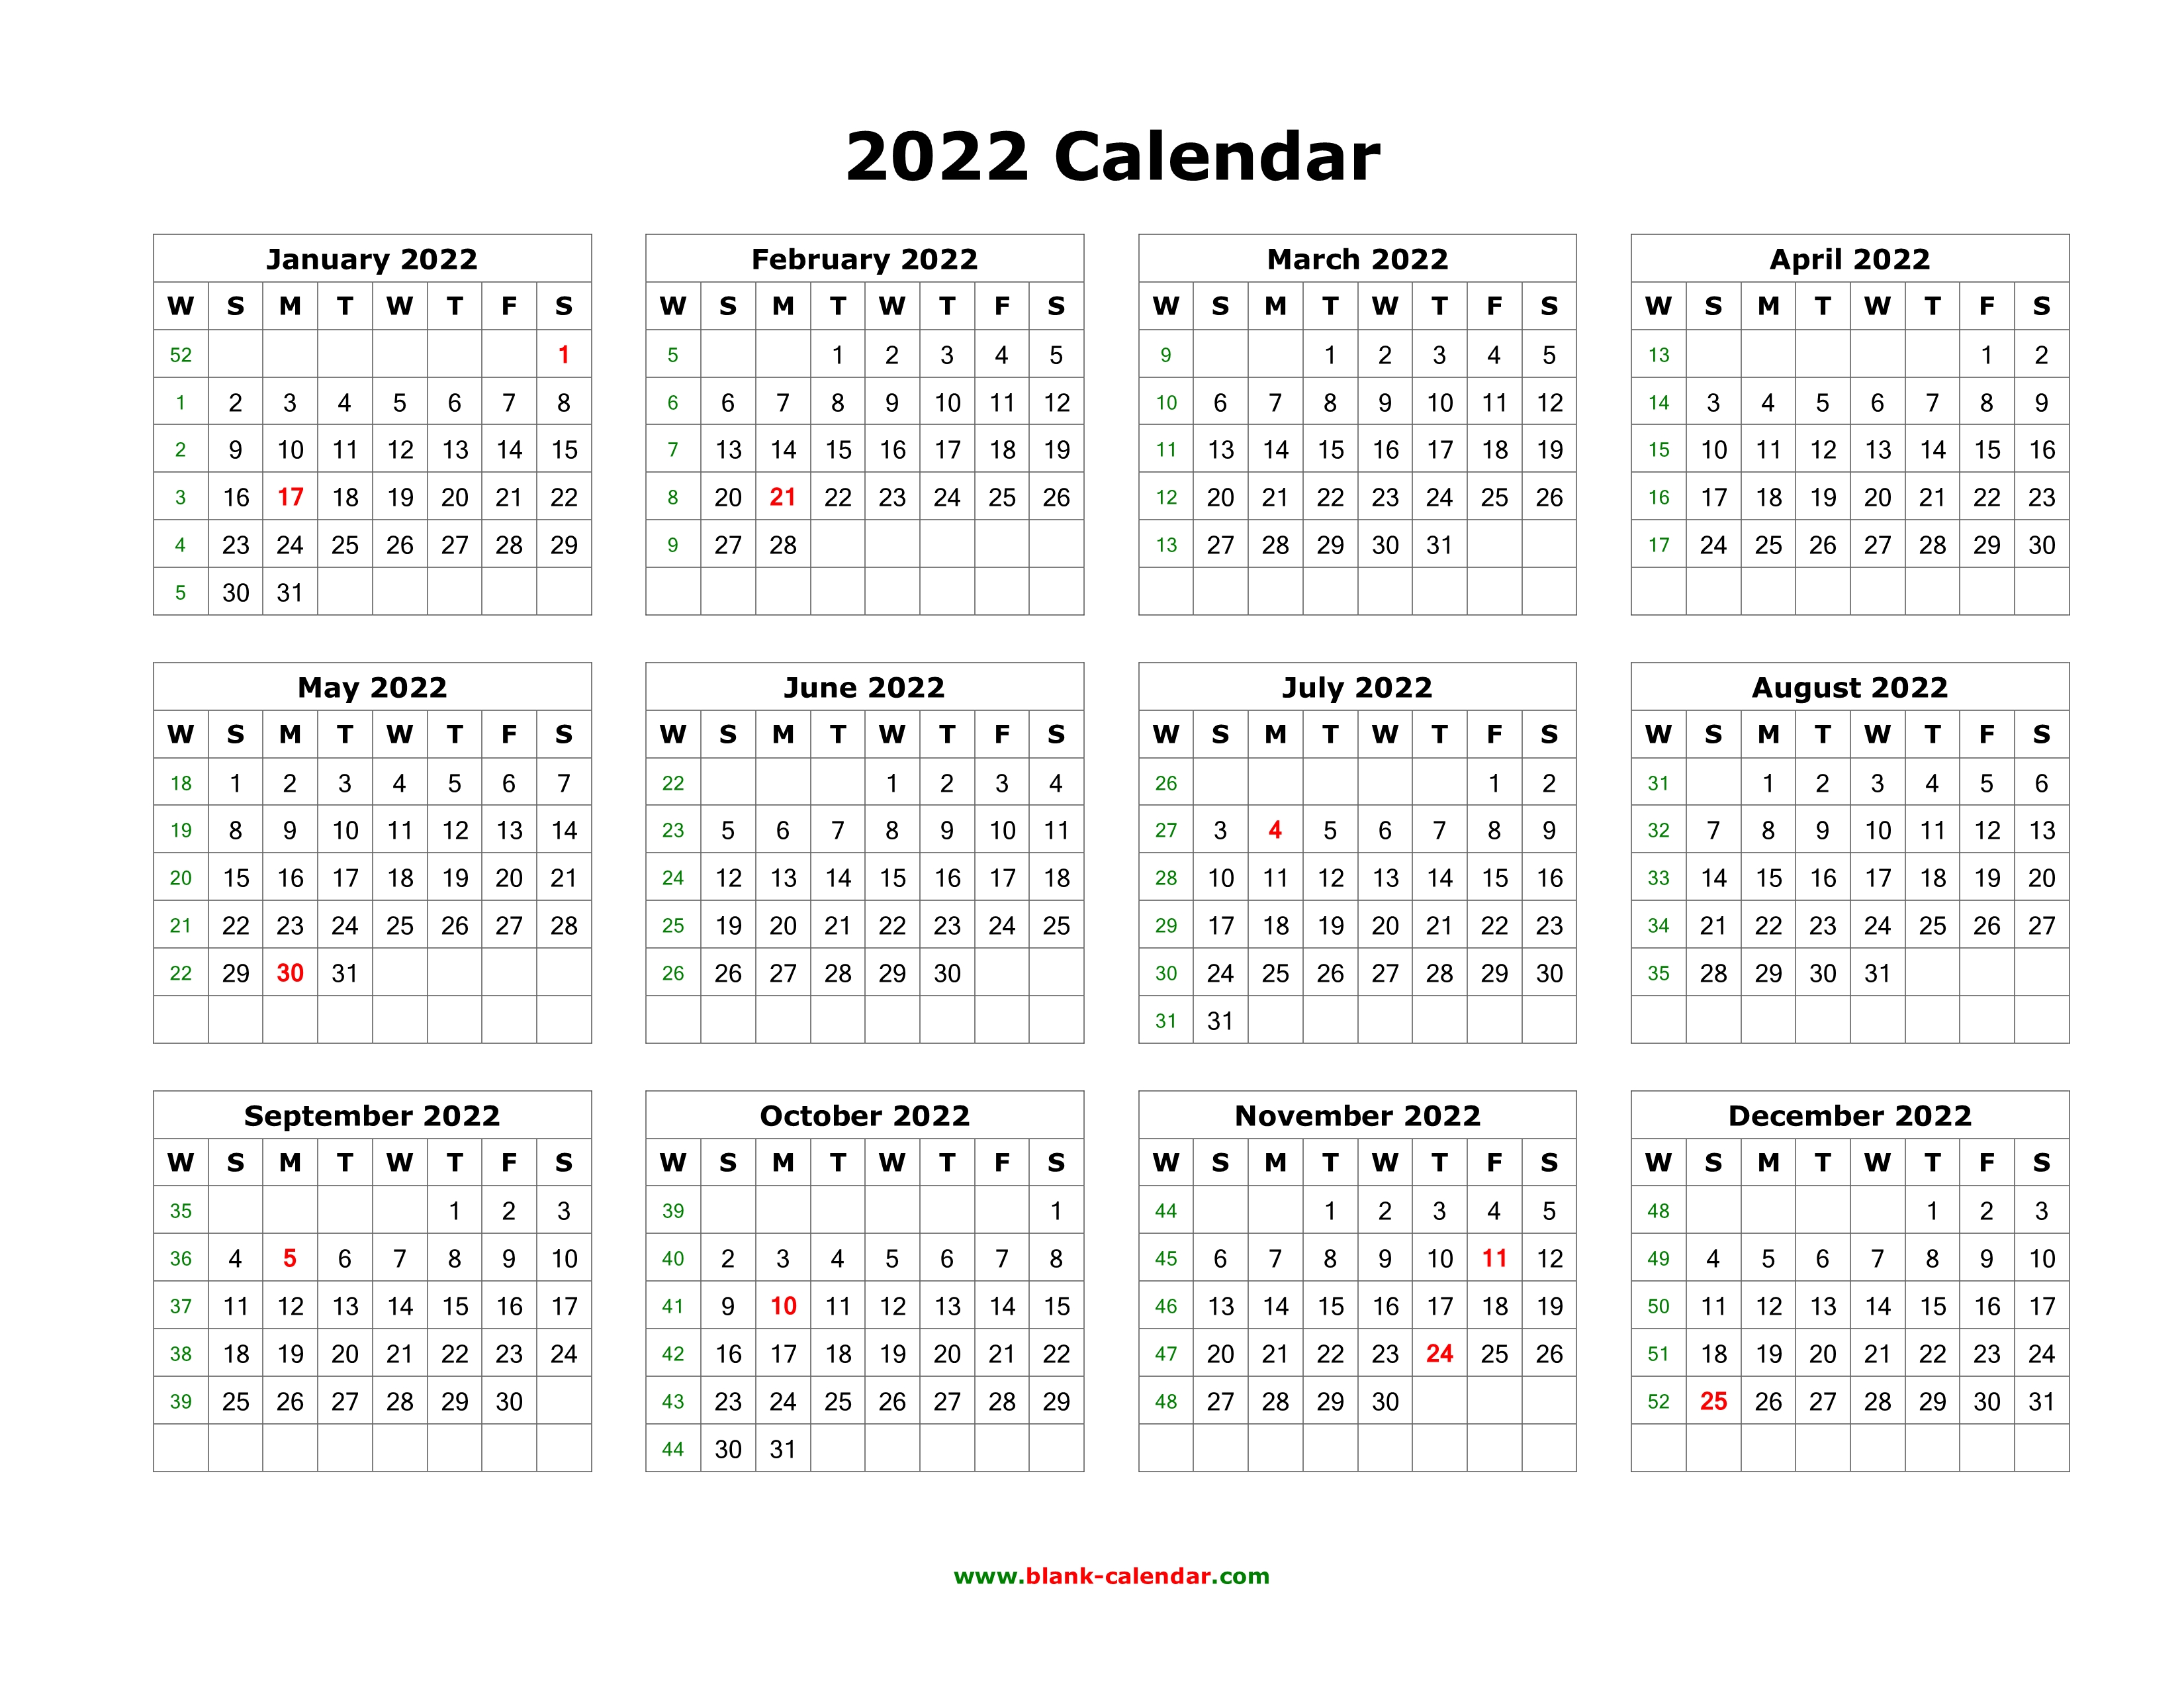 download-blank-calendar-2022-12-months-on-one-page-horizontal